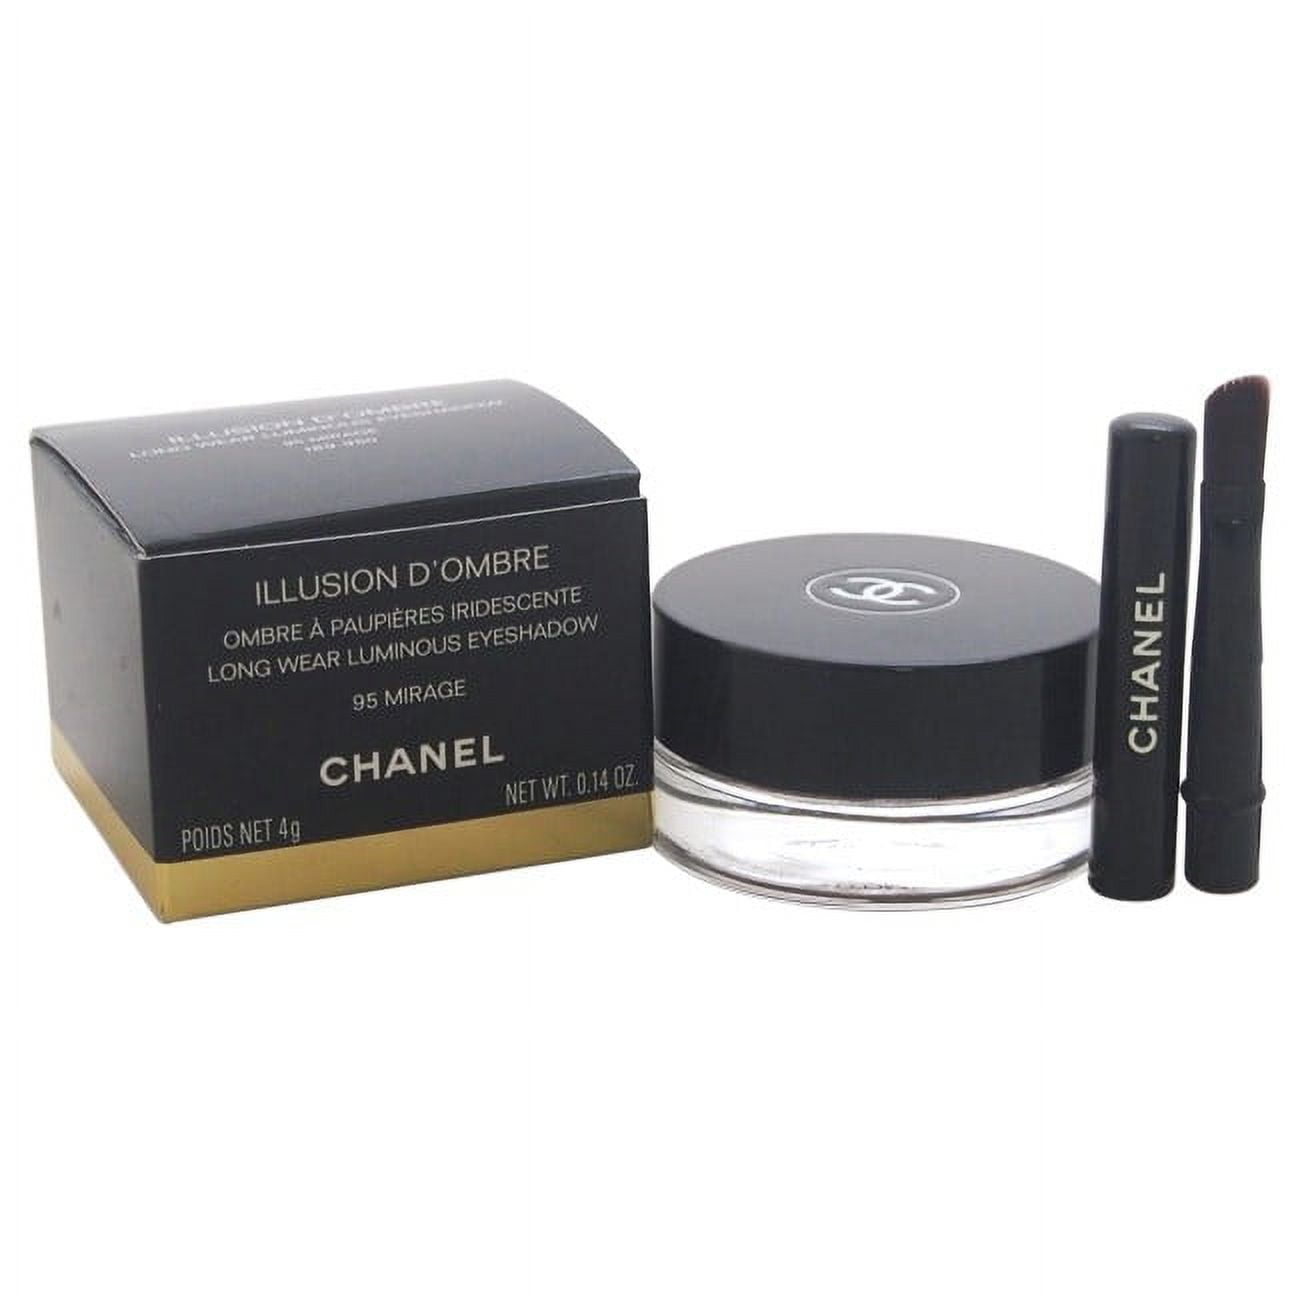 The Beauty Look Book: Chanel Illusion D'Ombre Mirage, New Moon and